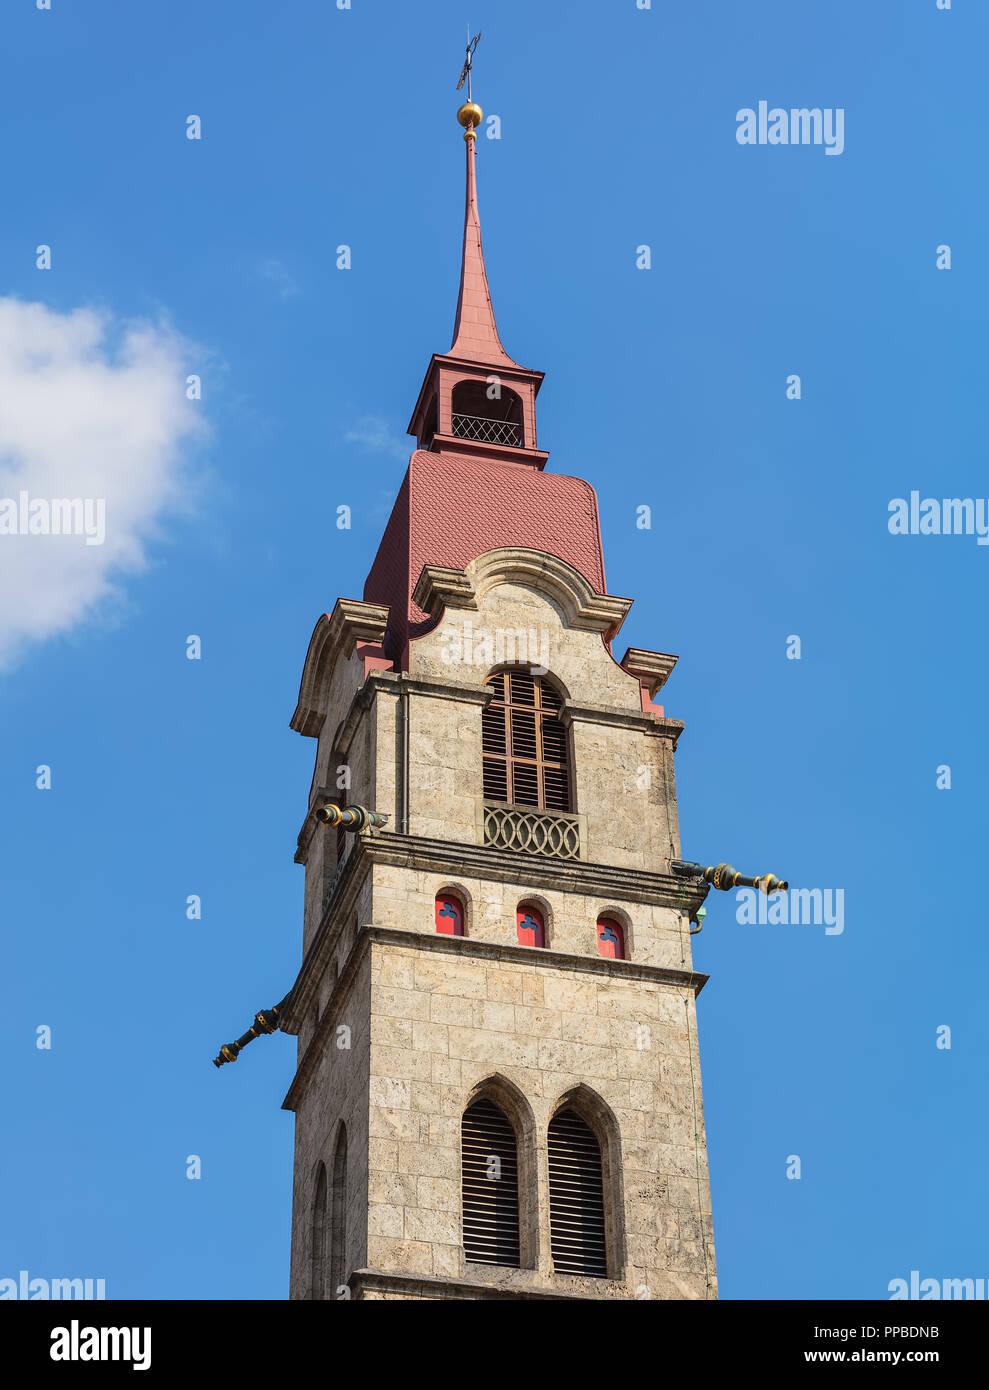 One of two towers of the City Church of Winterthur (German: Stadtkirche Winterthur) in Switzerland against blue sky. Stock Photo